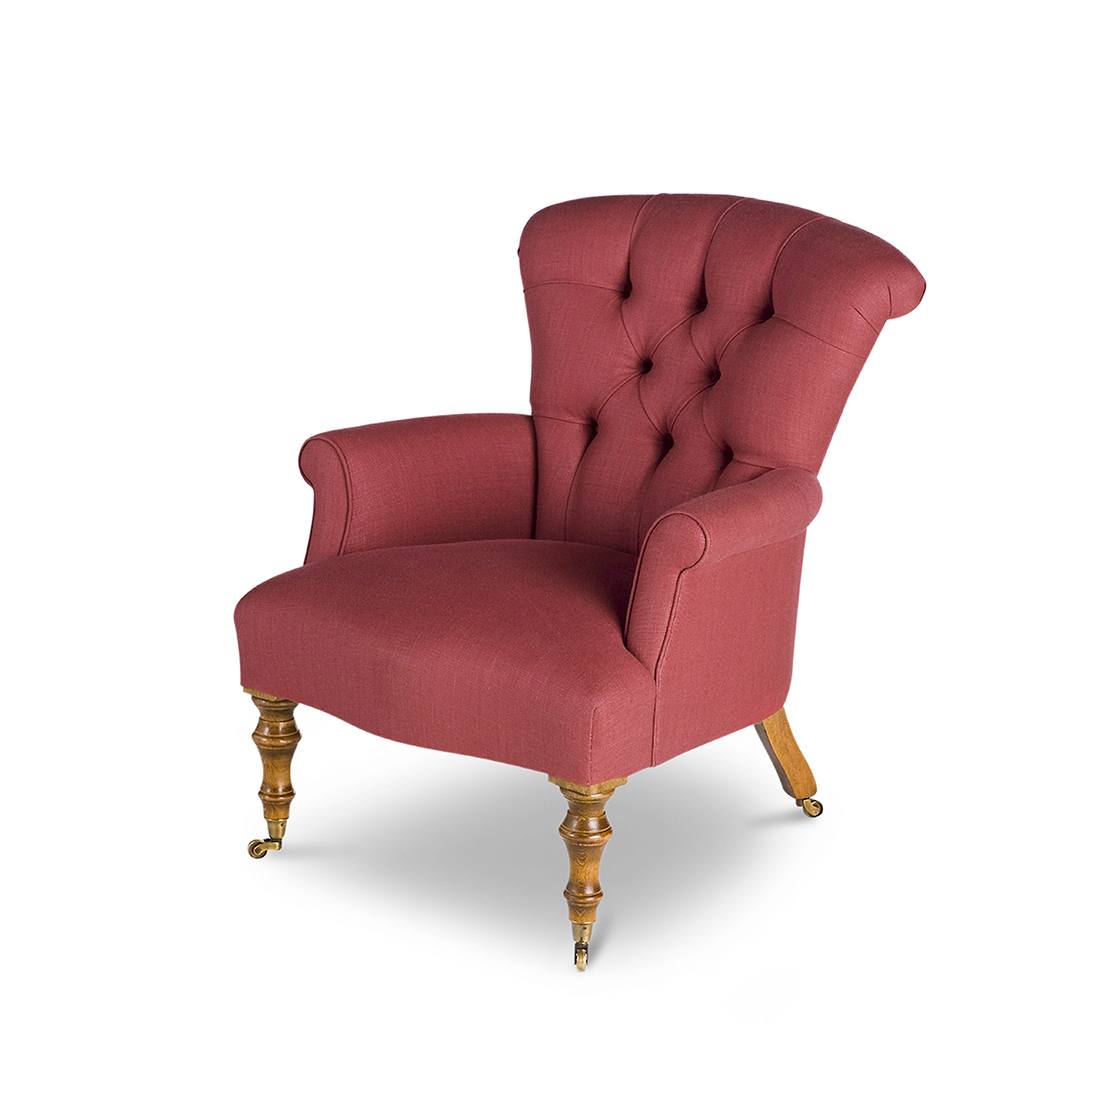 Victorian chair in Bantry linen - Lacquer red - Beaumont & Fletcher